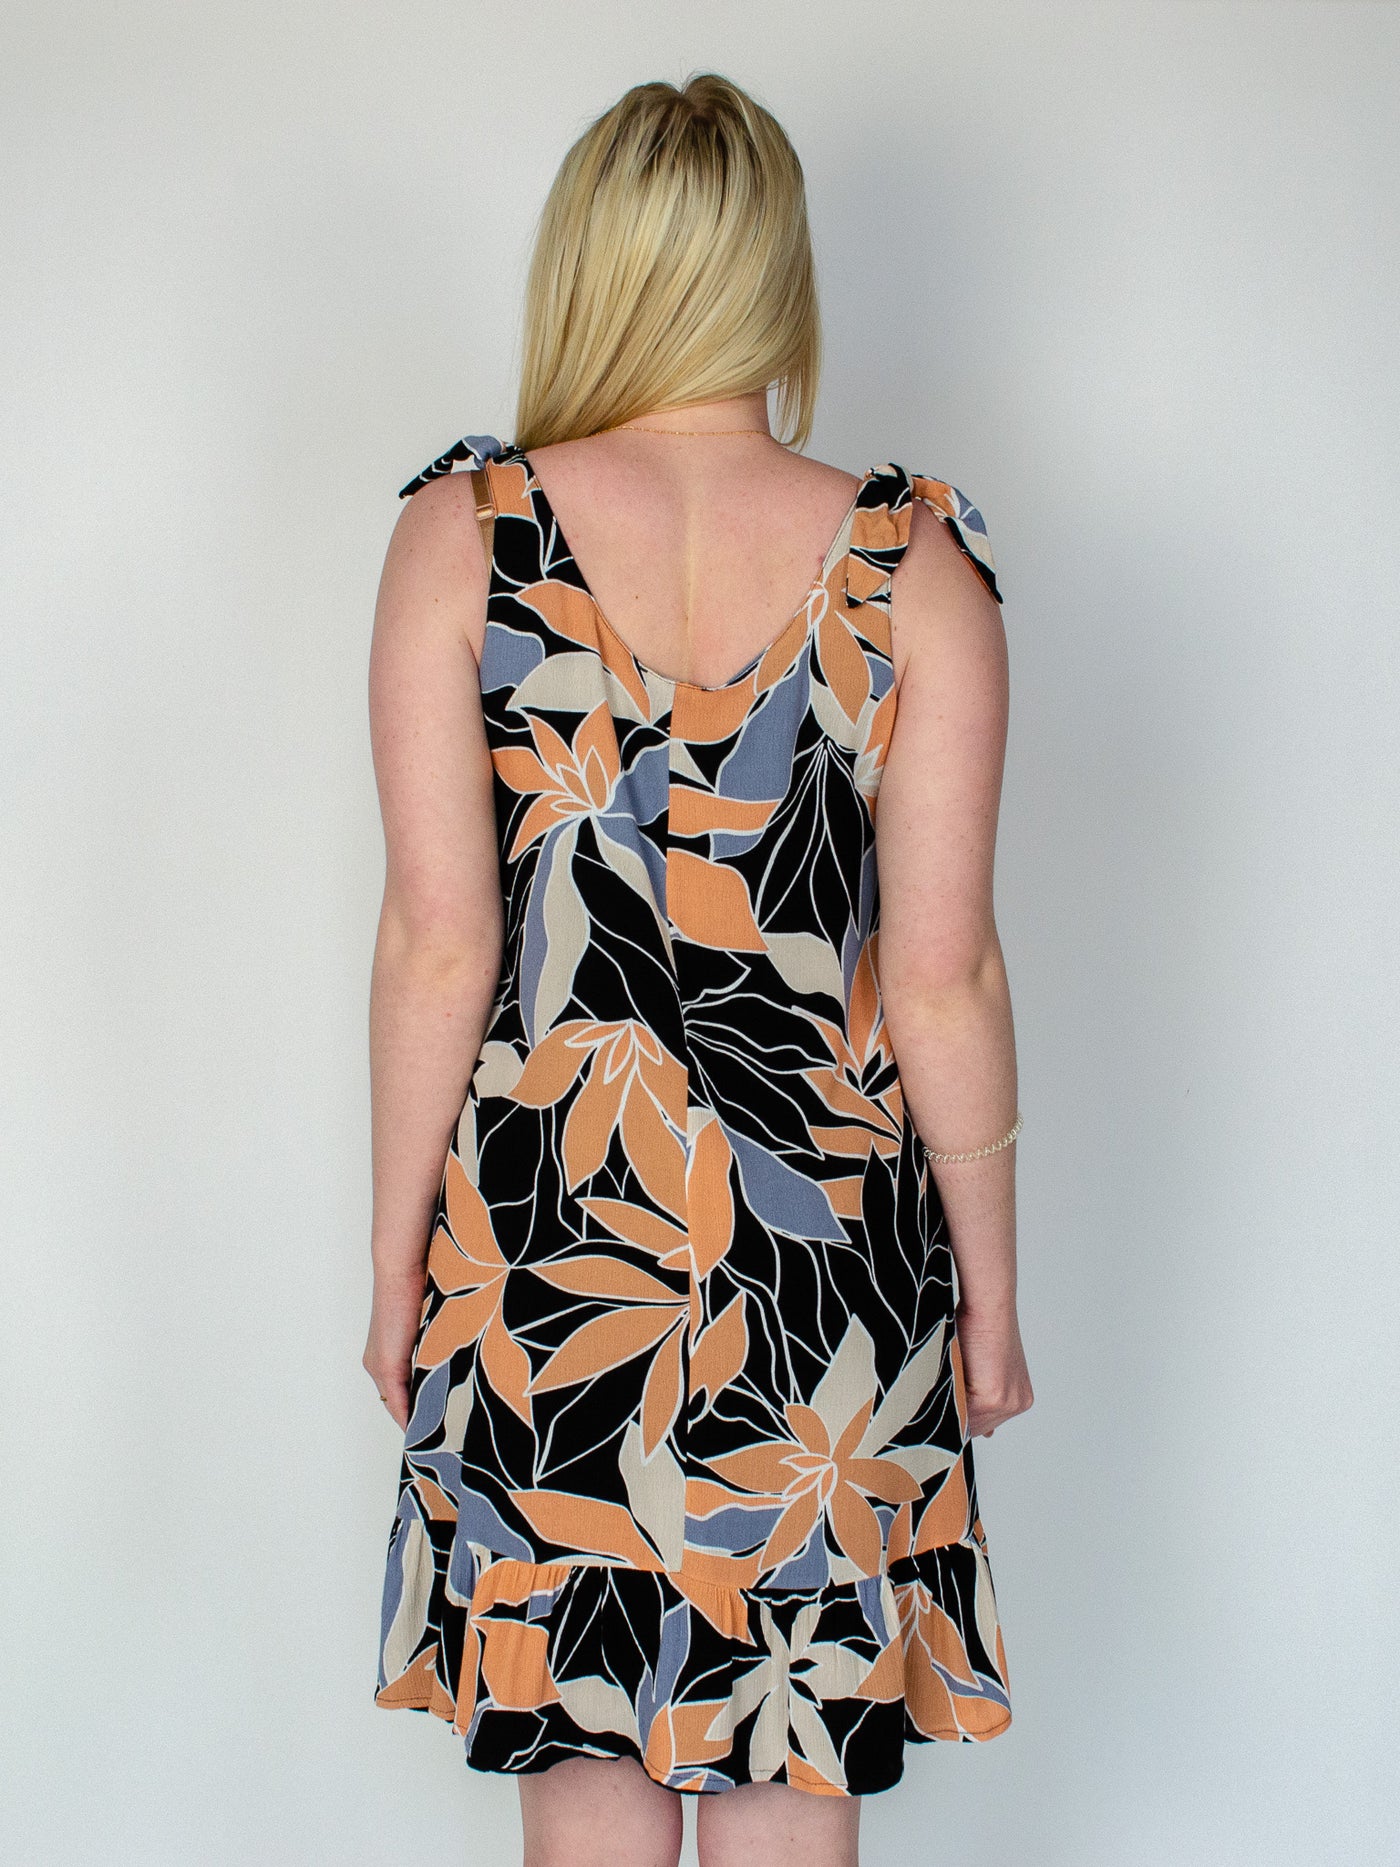 Model is wearing a midi dress with a orange, black, and blue colored floral print. The dress has a tie detail on the straps and is reversible and the other side is all black. Dress is paired with white sneakers. 